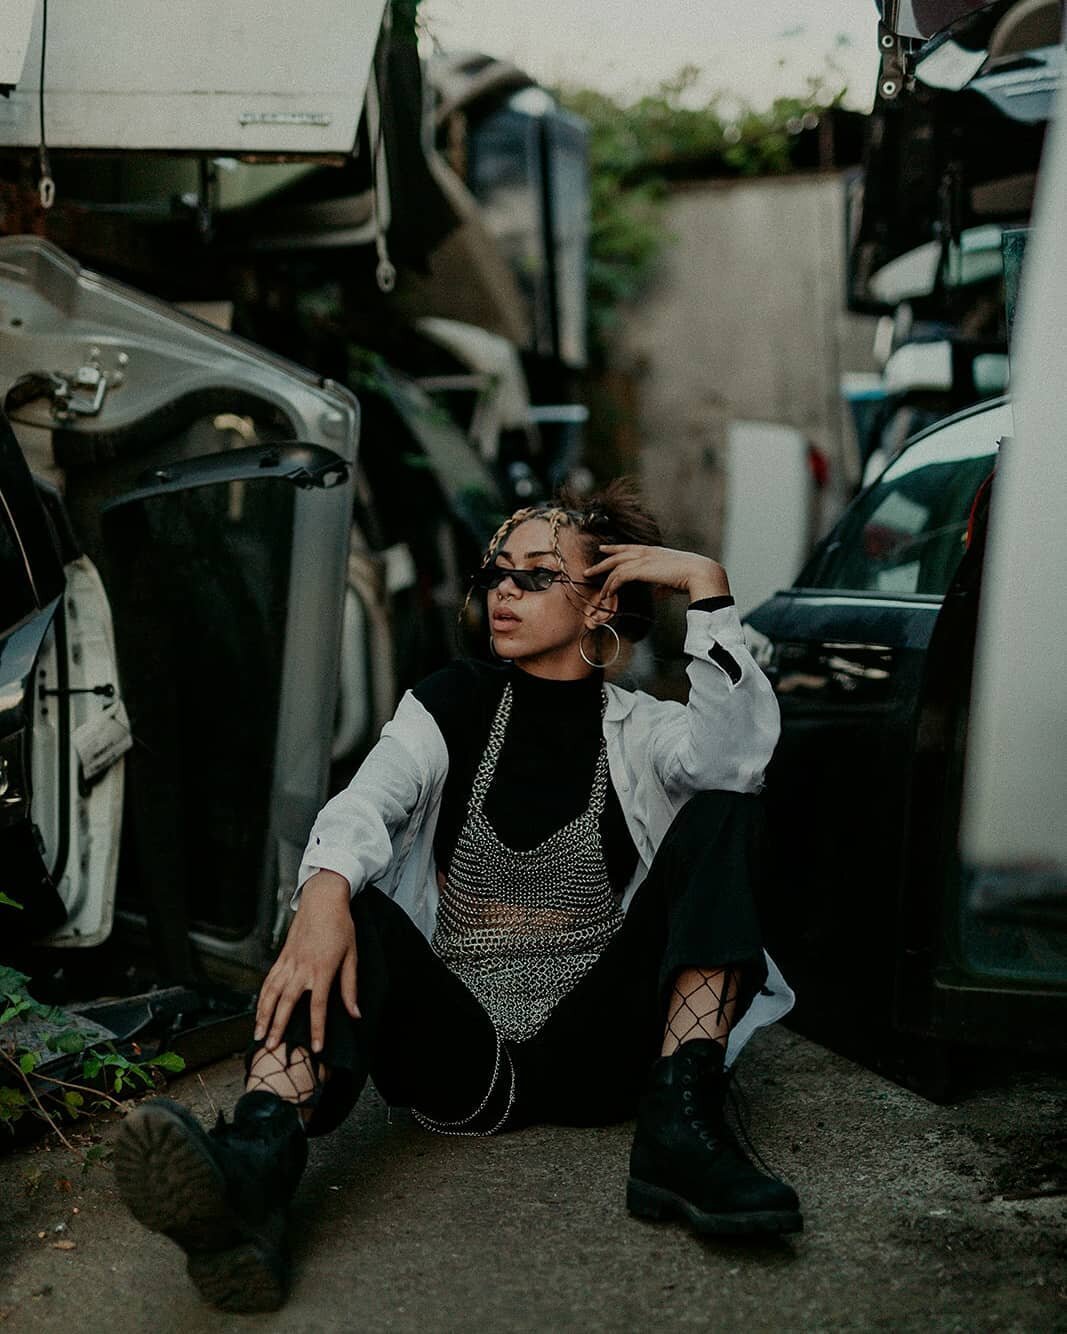 - Junkyard days are over -

Omgggg i miss shooting creative styled portraiture. It will always be at my roots and close to my heart, its how I started this whole thang! Coming up with funky ideas and making friends model for me, those were the days. 